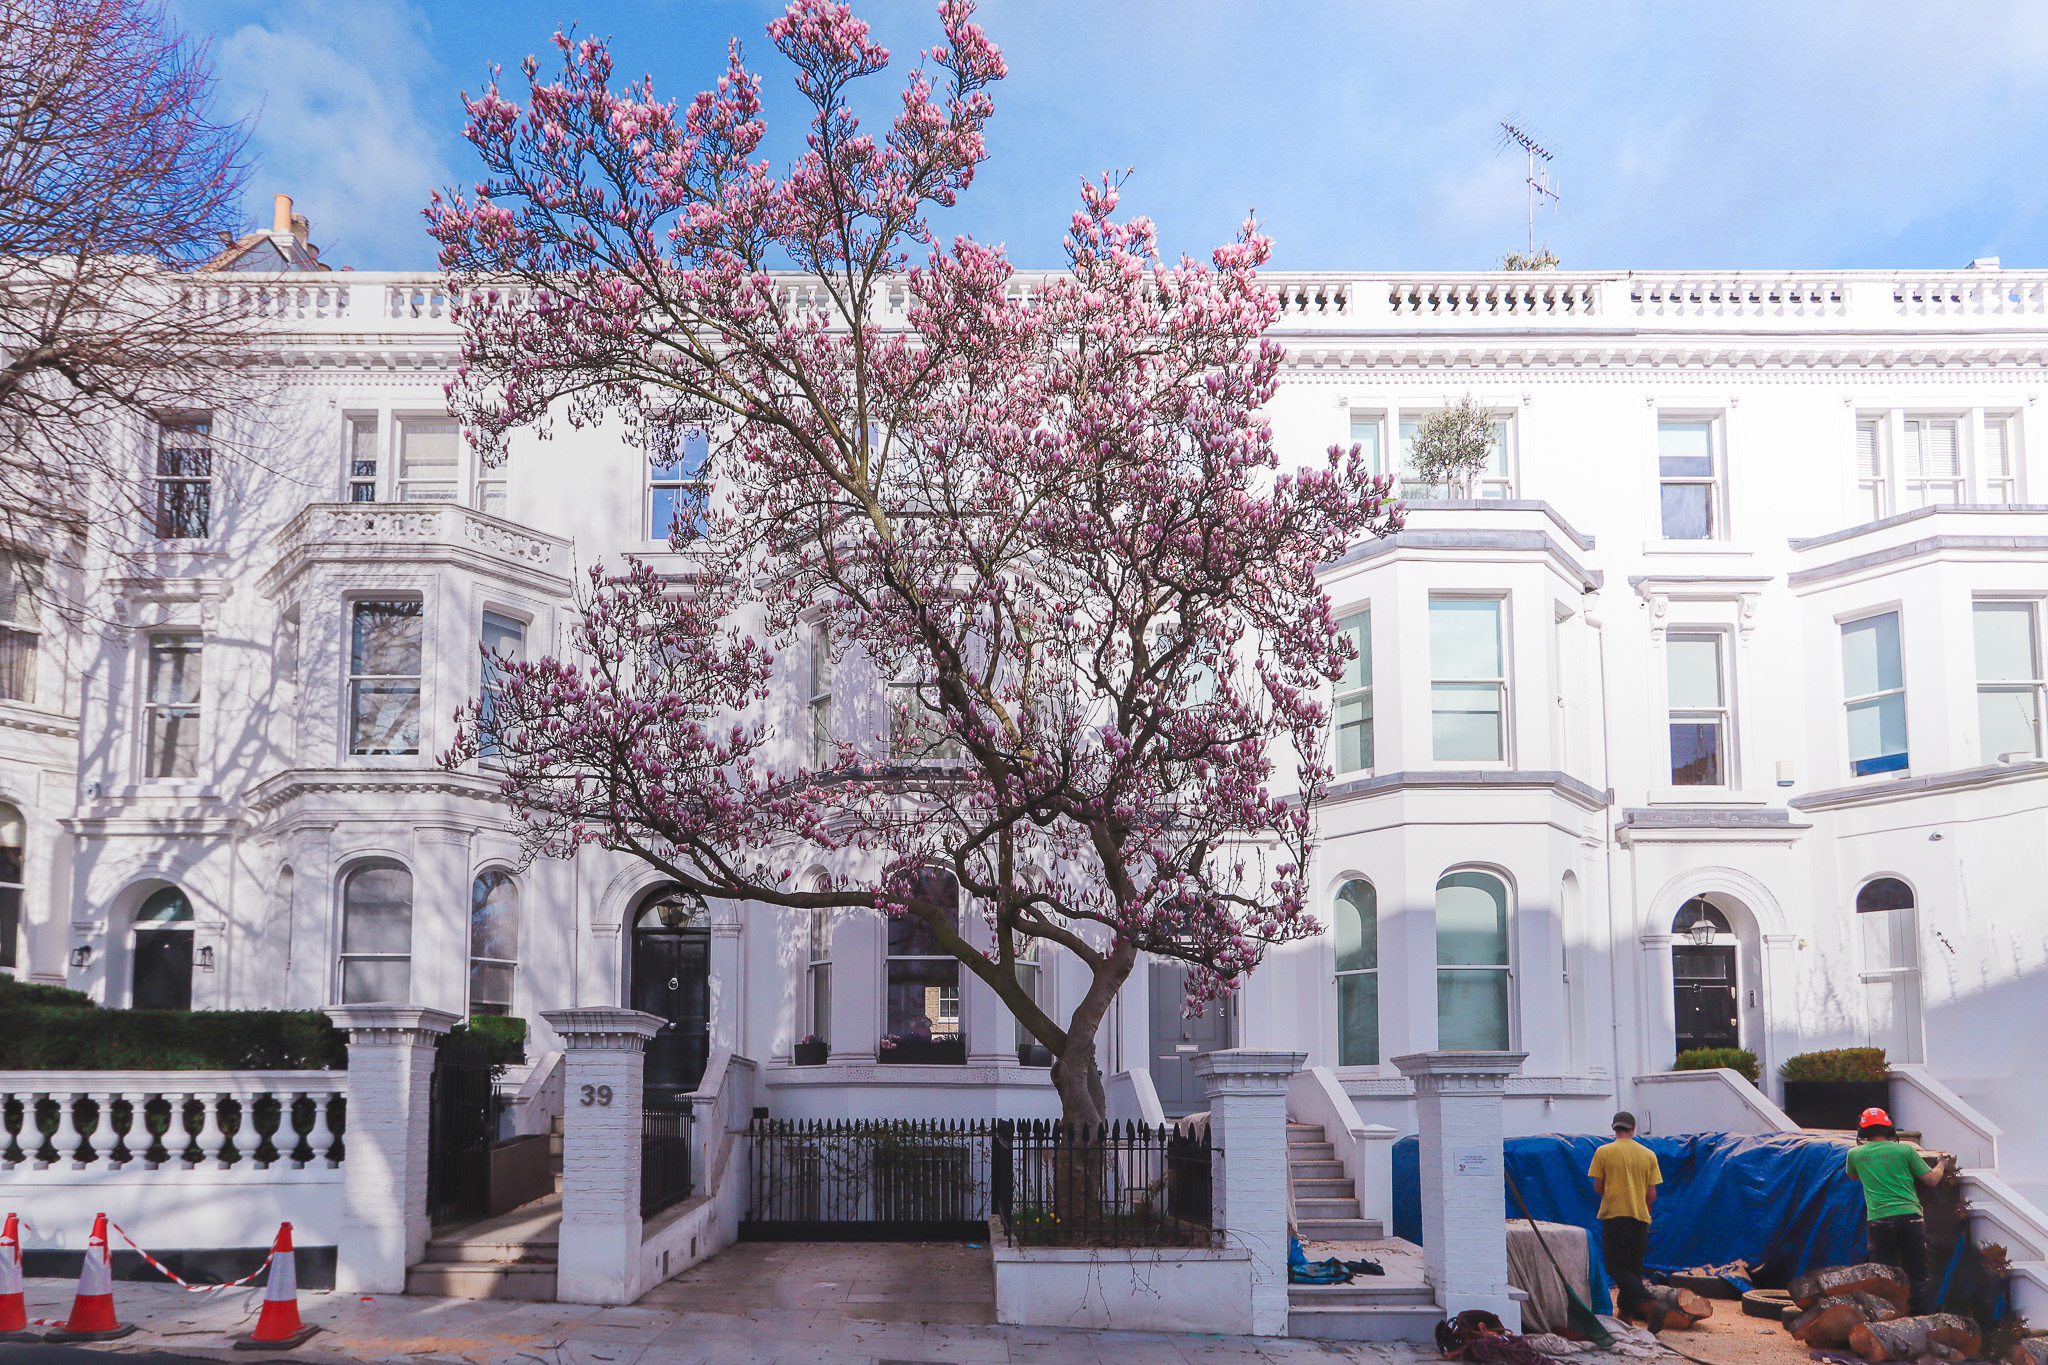 39 Argyll Rd magnolia in bloom, Notting Hill, London